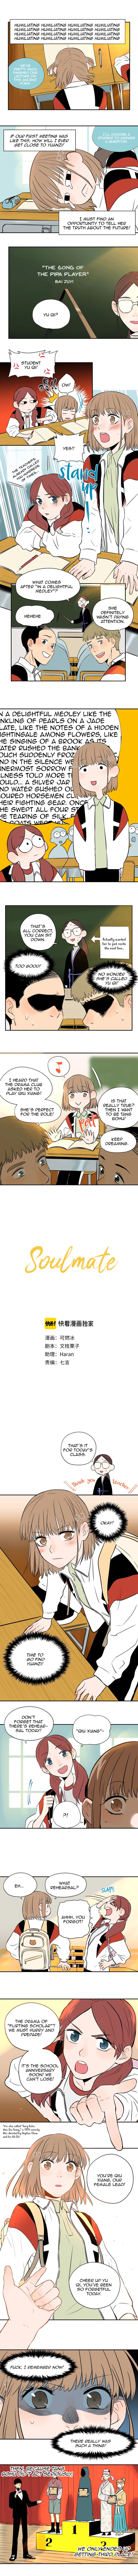 Soulmate - Page 2